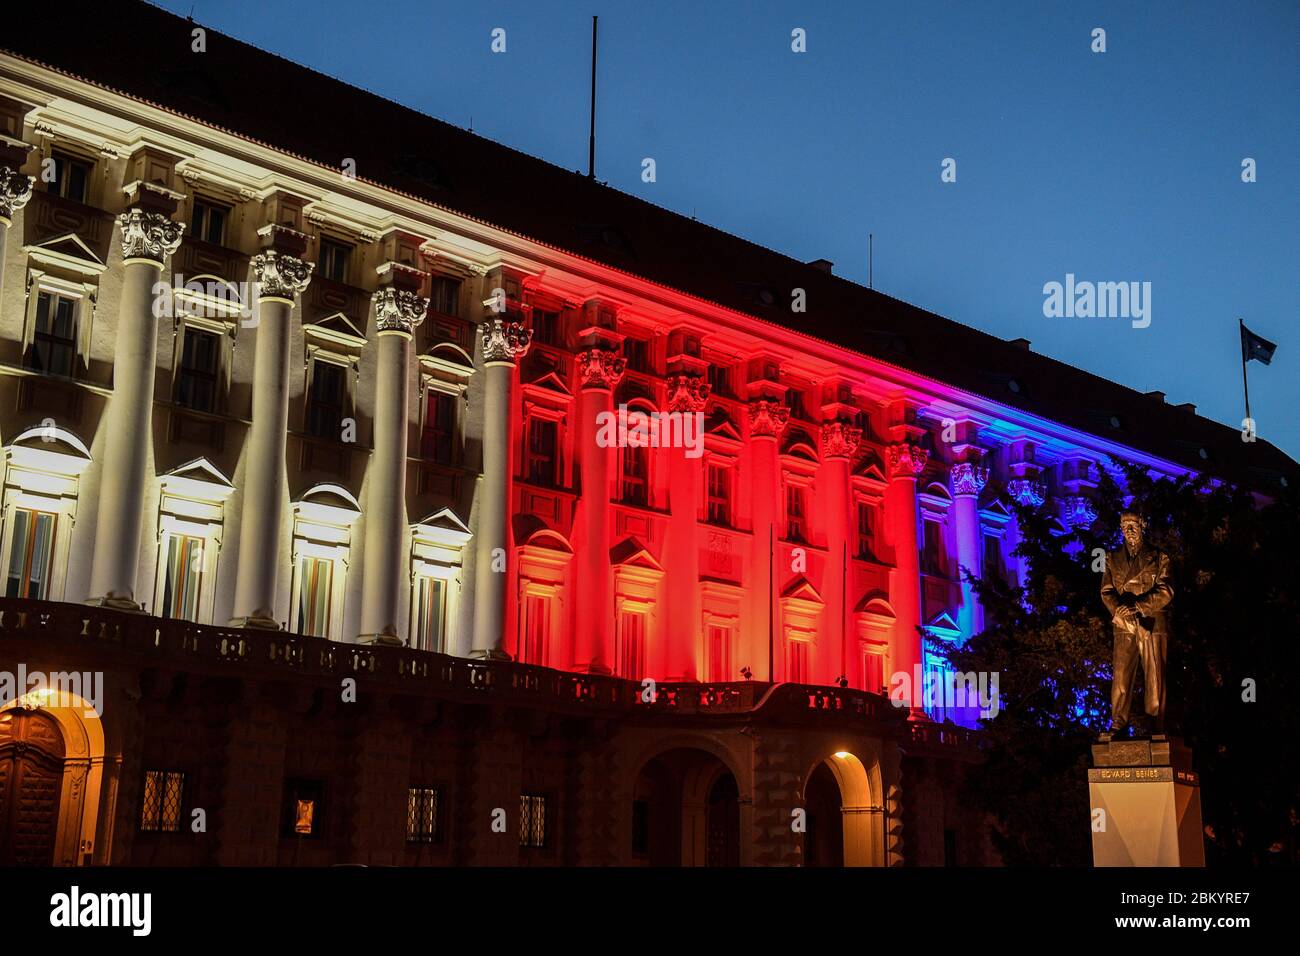 Prague, Czech Republic. 05th May, 2020. The Cernin palace, the seat of the Foreign Ministry, shines in colours within the across-the-world gesture 'Giving Tuesday' of homage to the generosity and good deeds reacting to the coronavirus pandemic, in Prague, Czech Republic, on May 5, 2020. Credit: Michal Kamaryt/CTK Photo/Alamy Live News Stock Photo